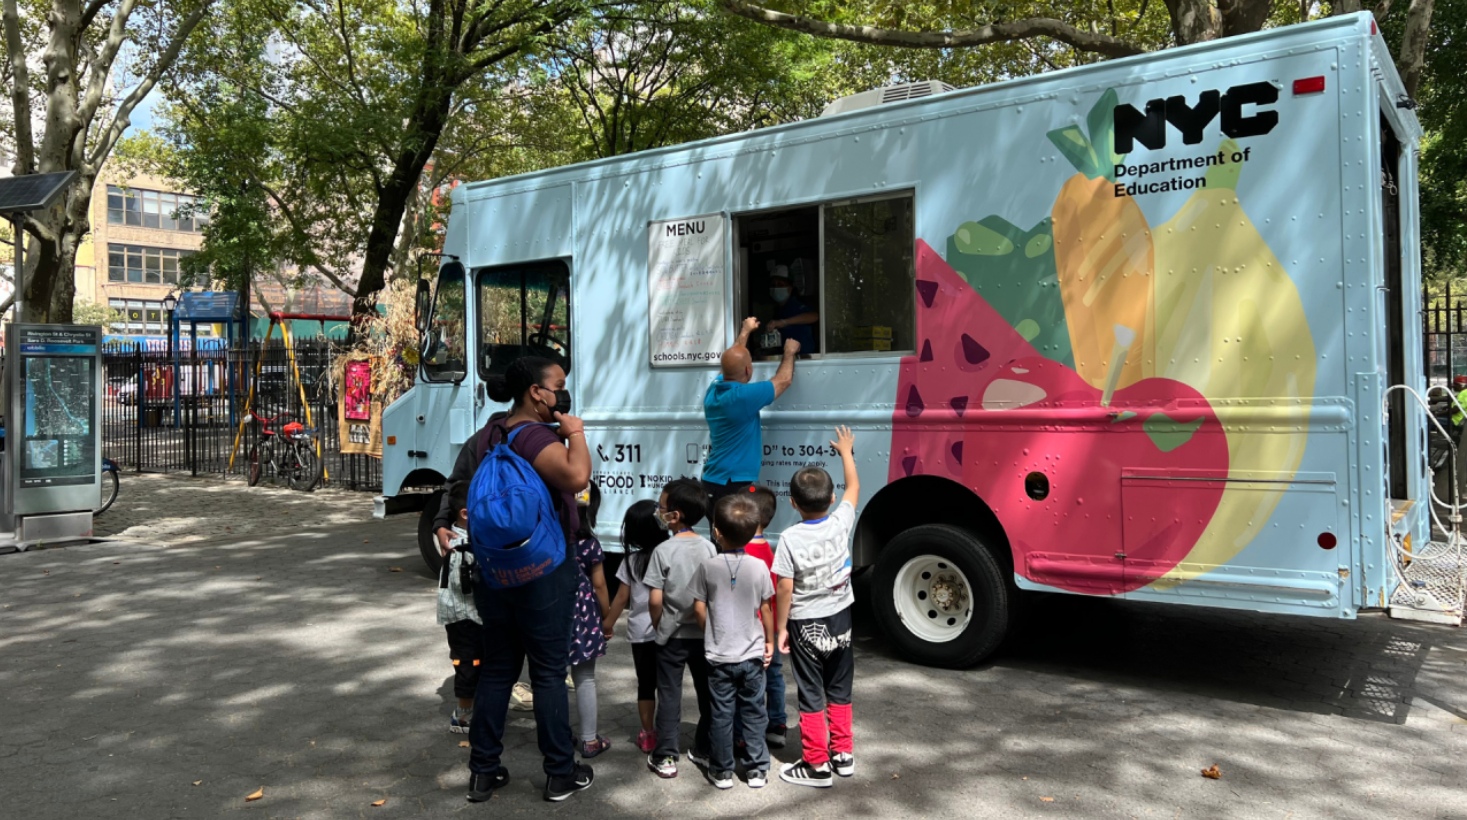 Children line up in front of a food truck to receive their summer meals